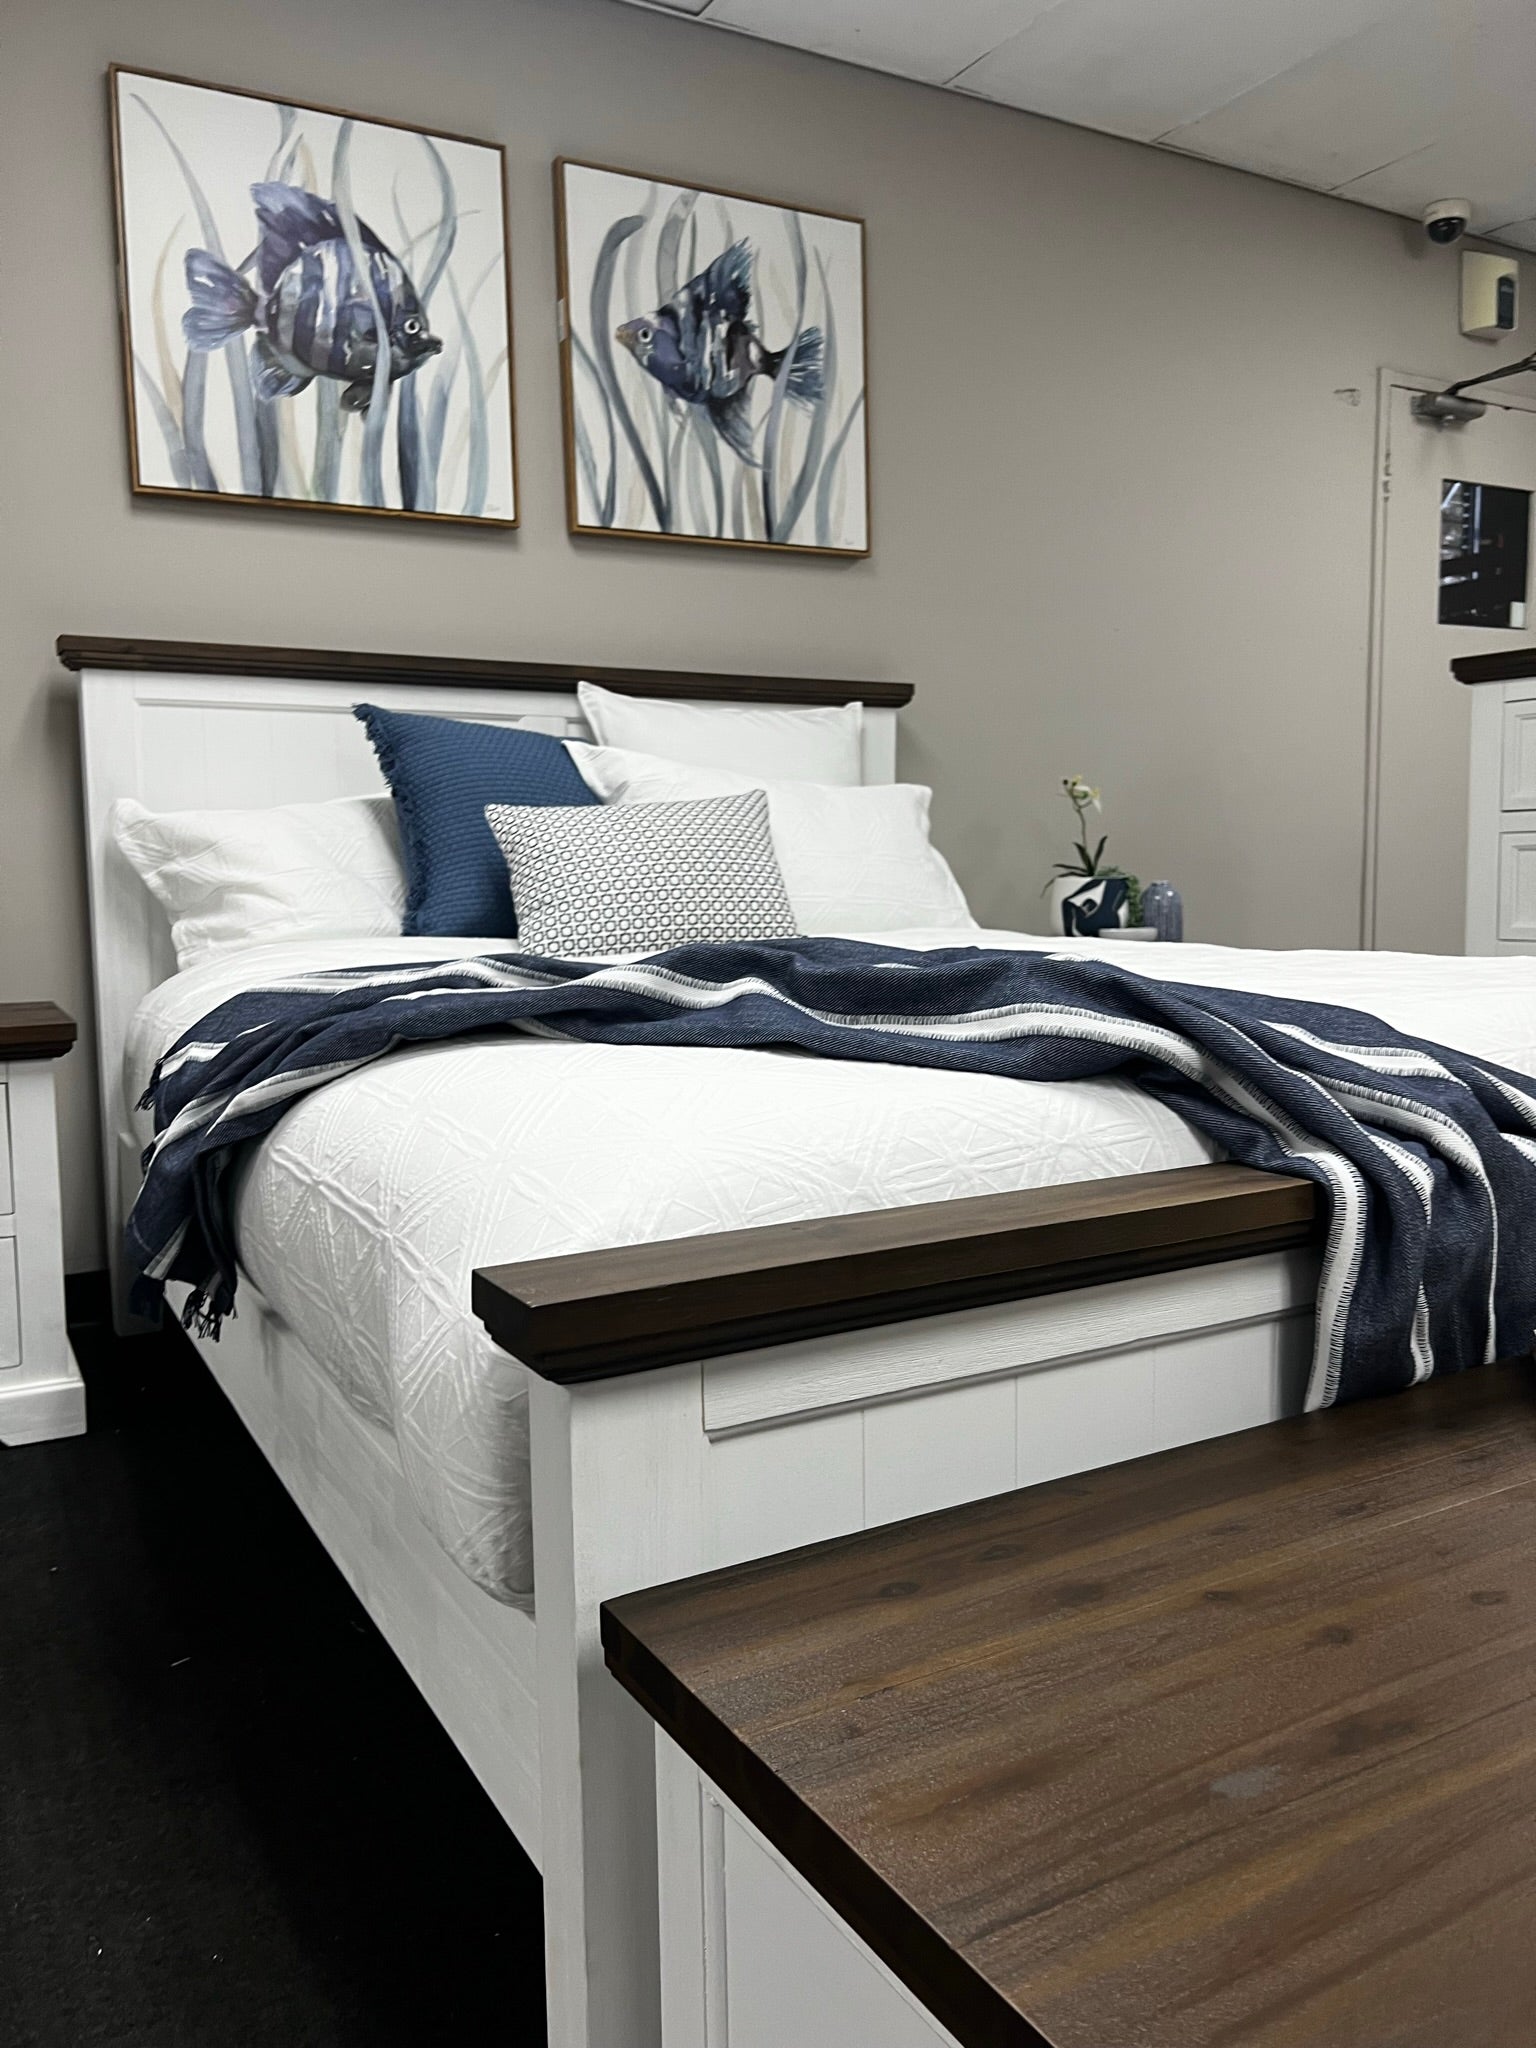 Hamptons 4 Piece King Bedroom Package With Tallboy